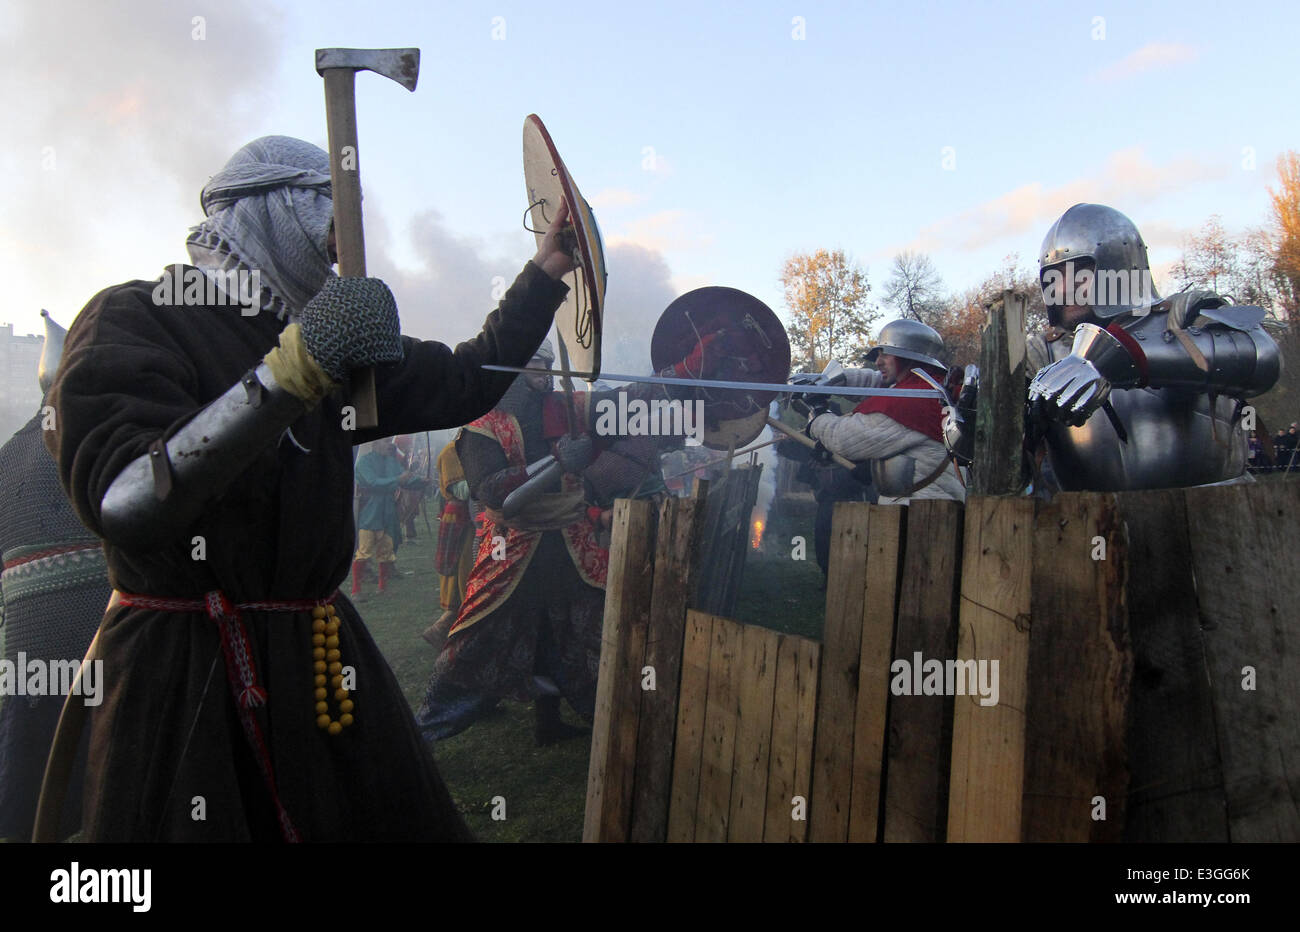 Bulgarian, Czech and Polish amateur actors re-enact a scene from the battle of Polish King Wladyslaw III Warnenczyk against Ottoman Turks 569 years ago near the town of Varna. About a hundred history enthusiasts and amateur actors gathered near the town o Stock Photo